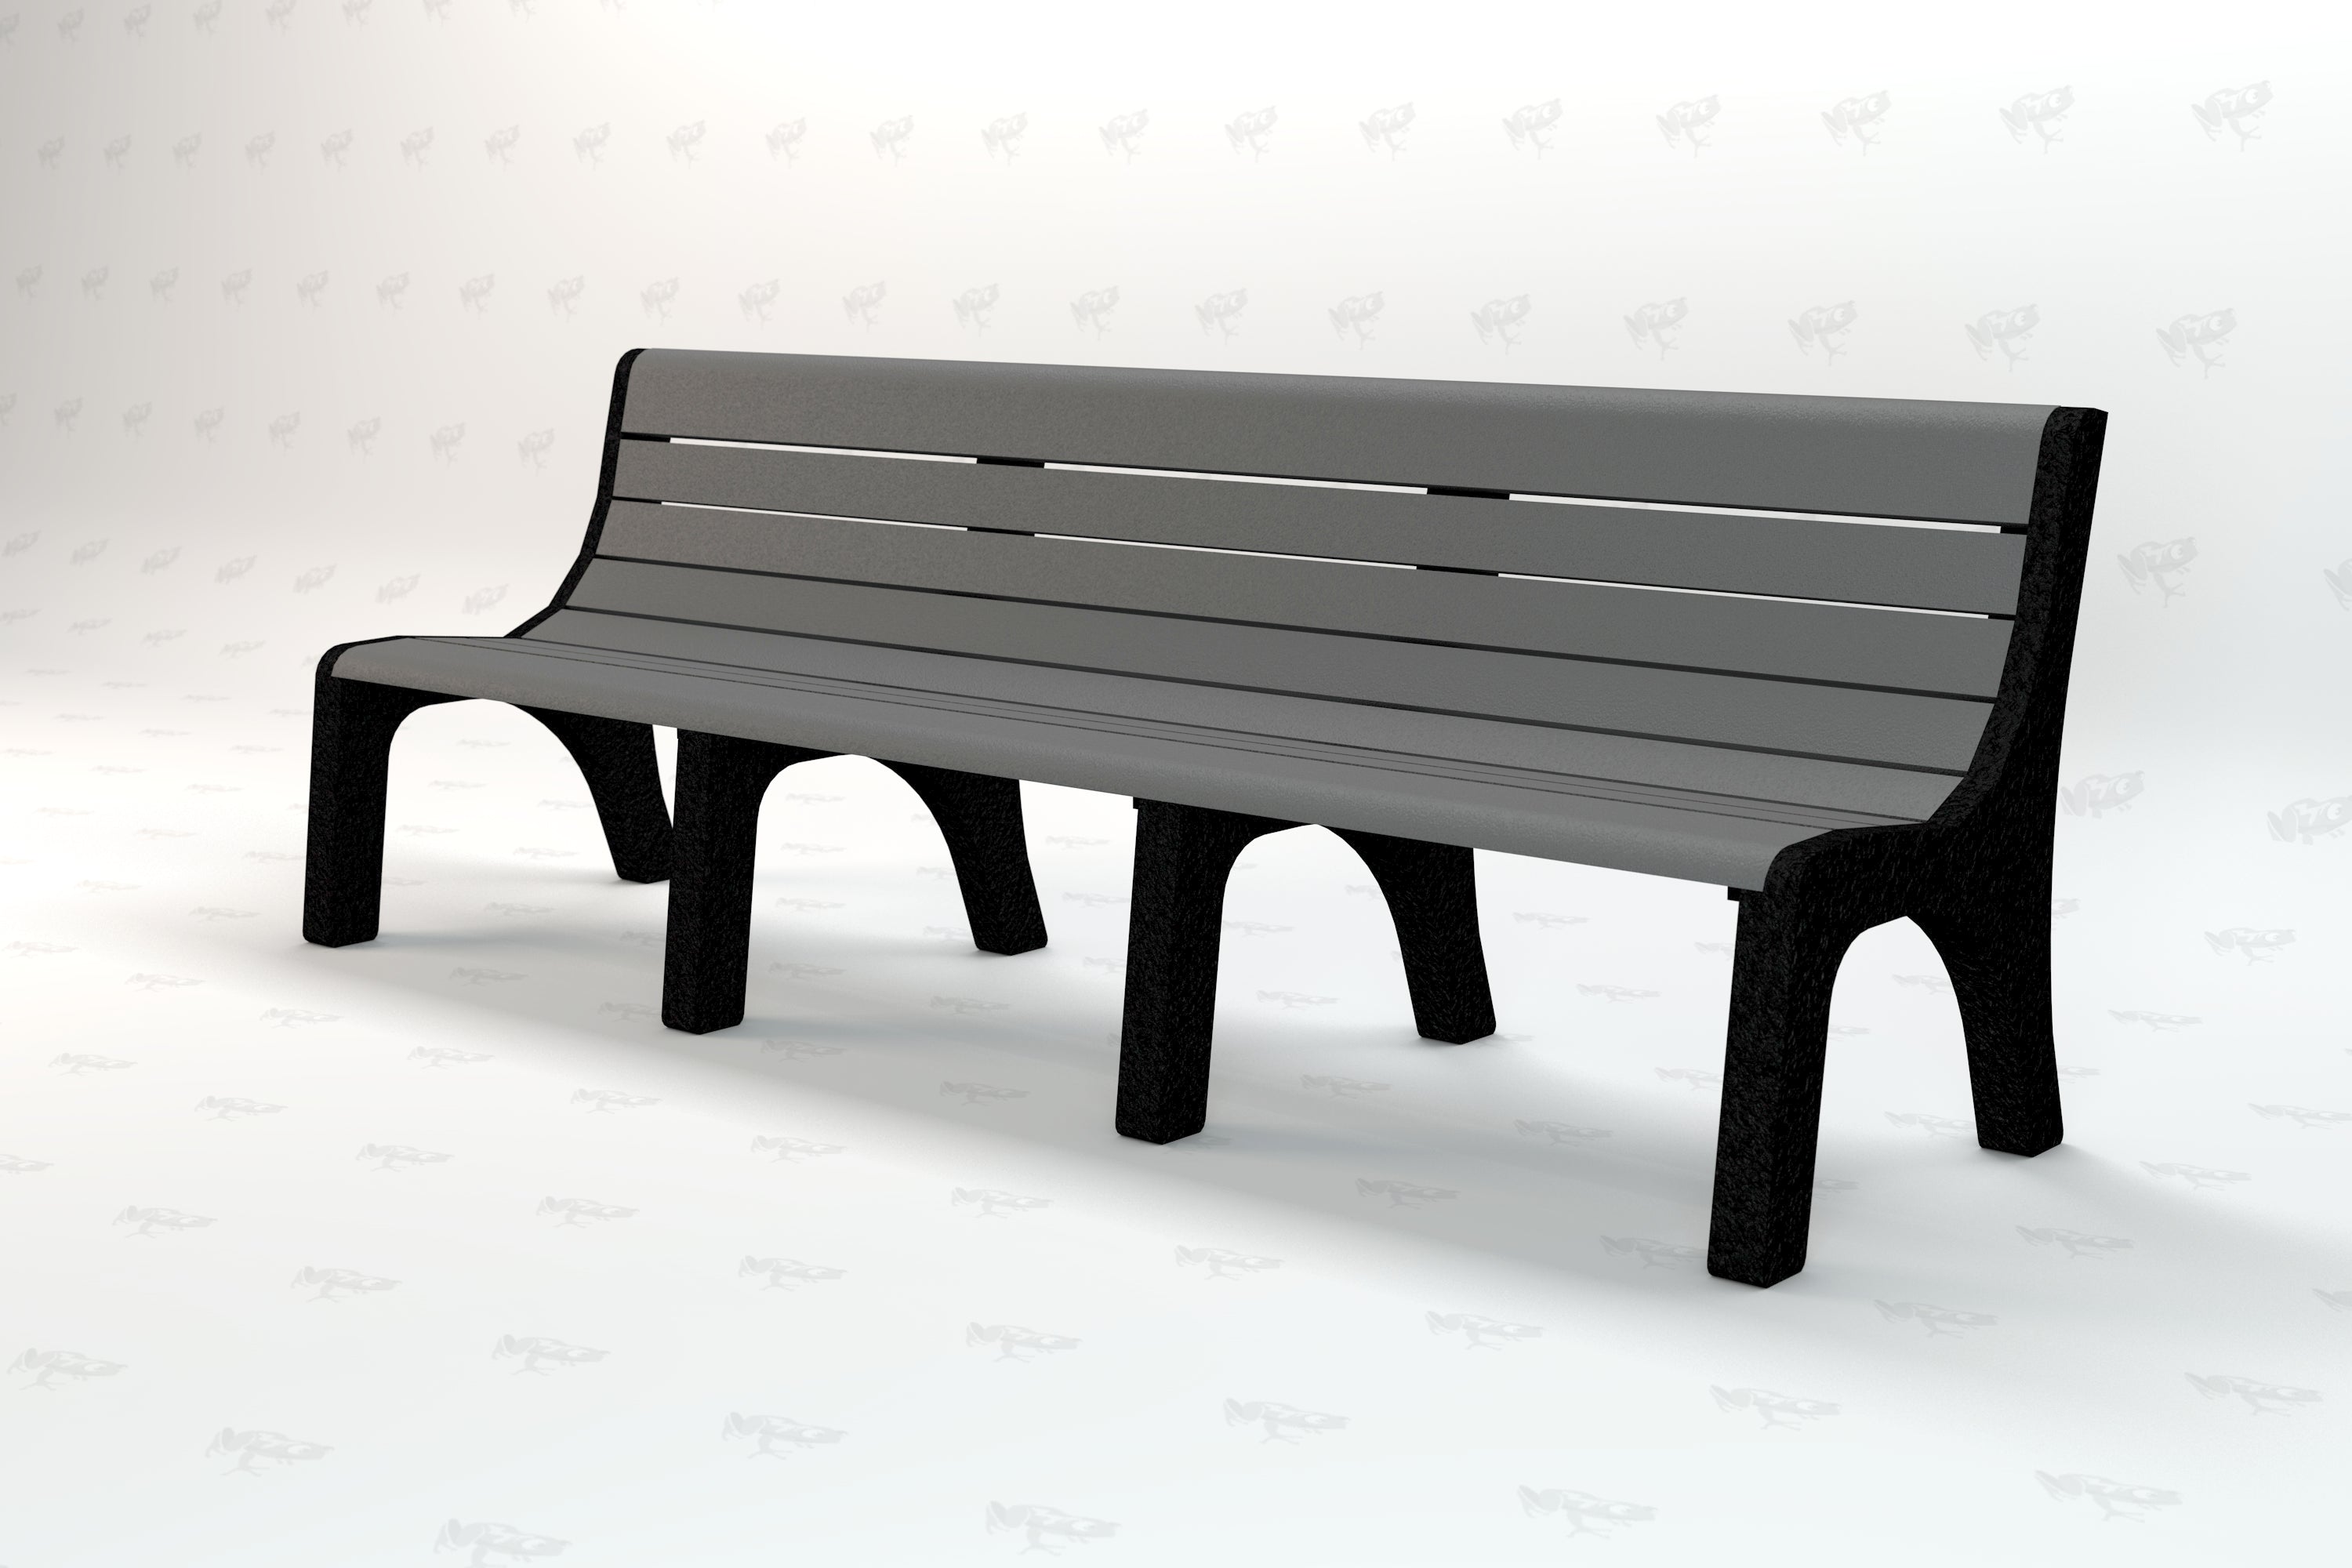 Newport Recycled Plastic Park Bench